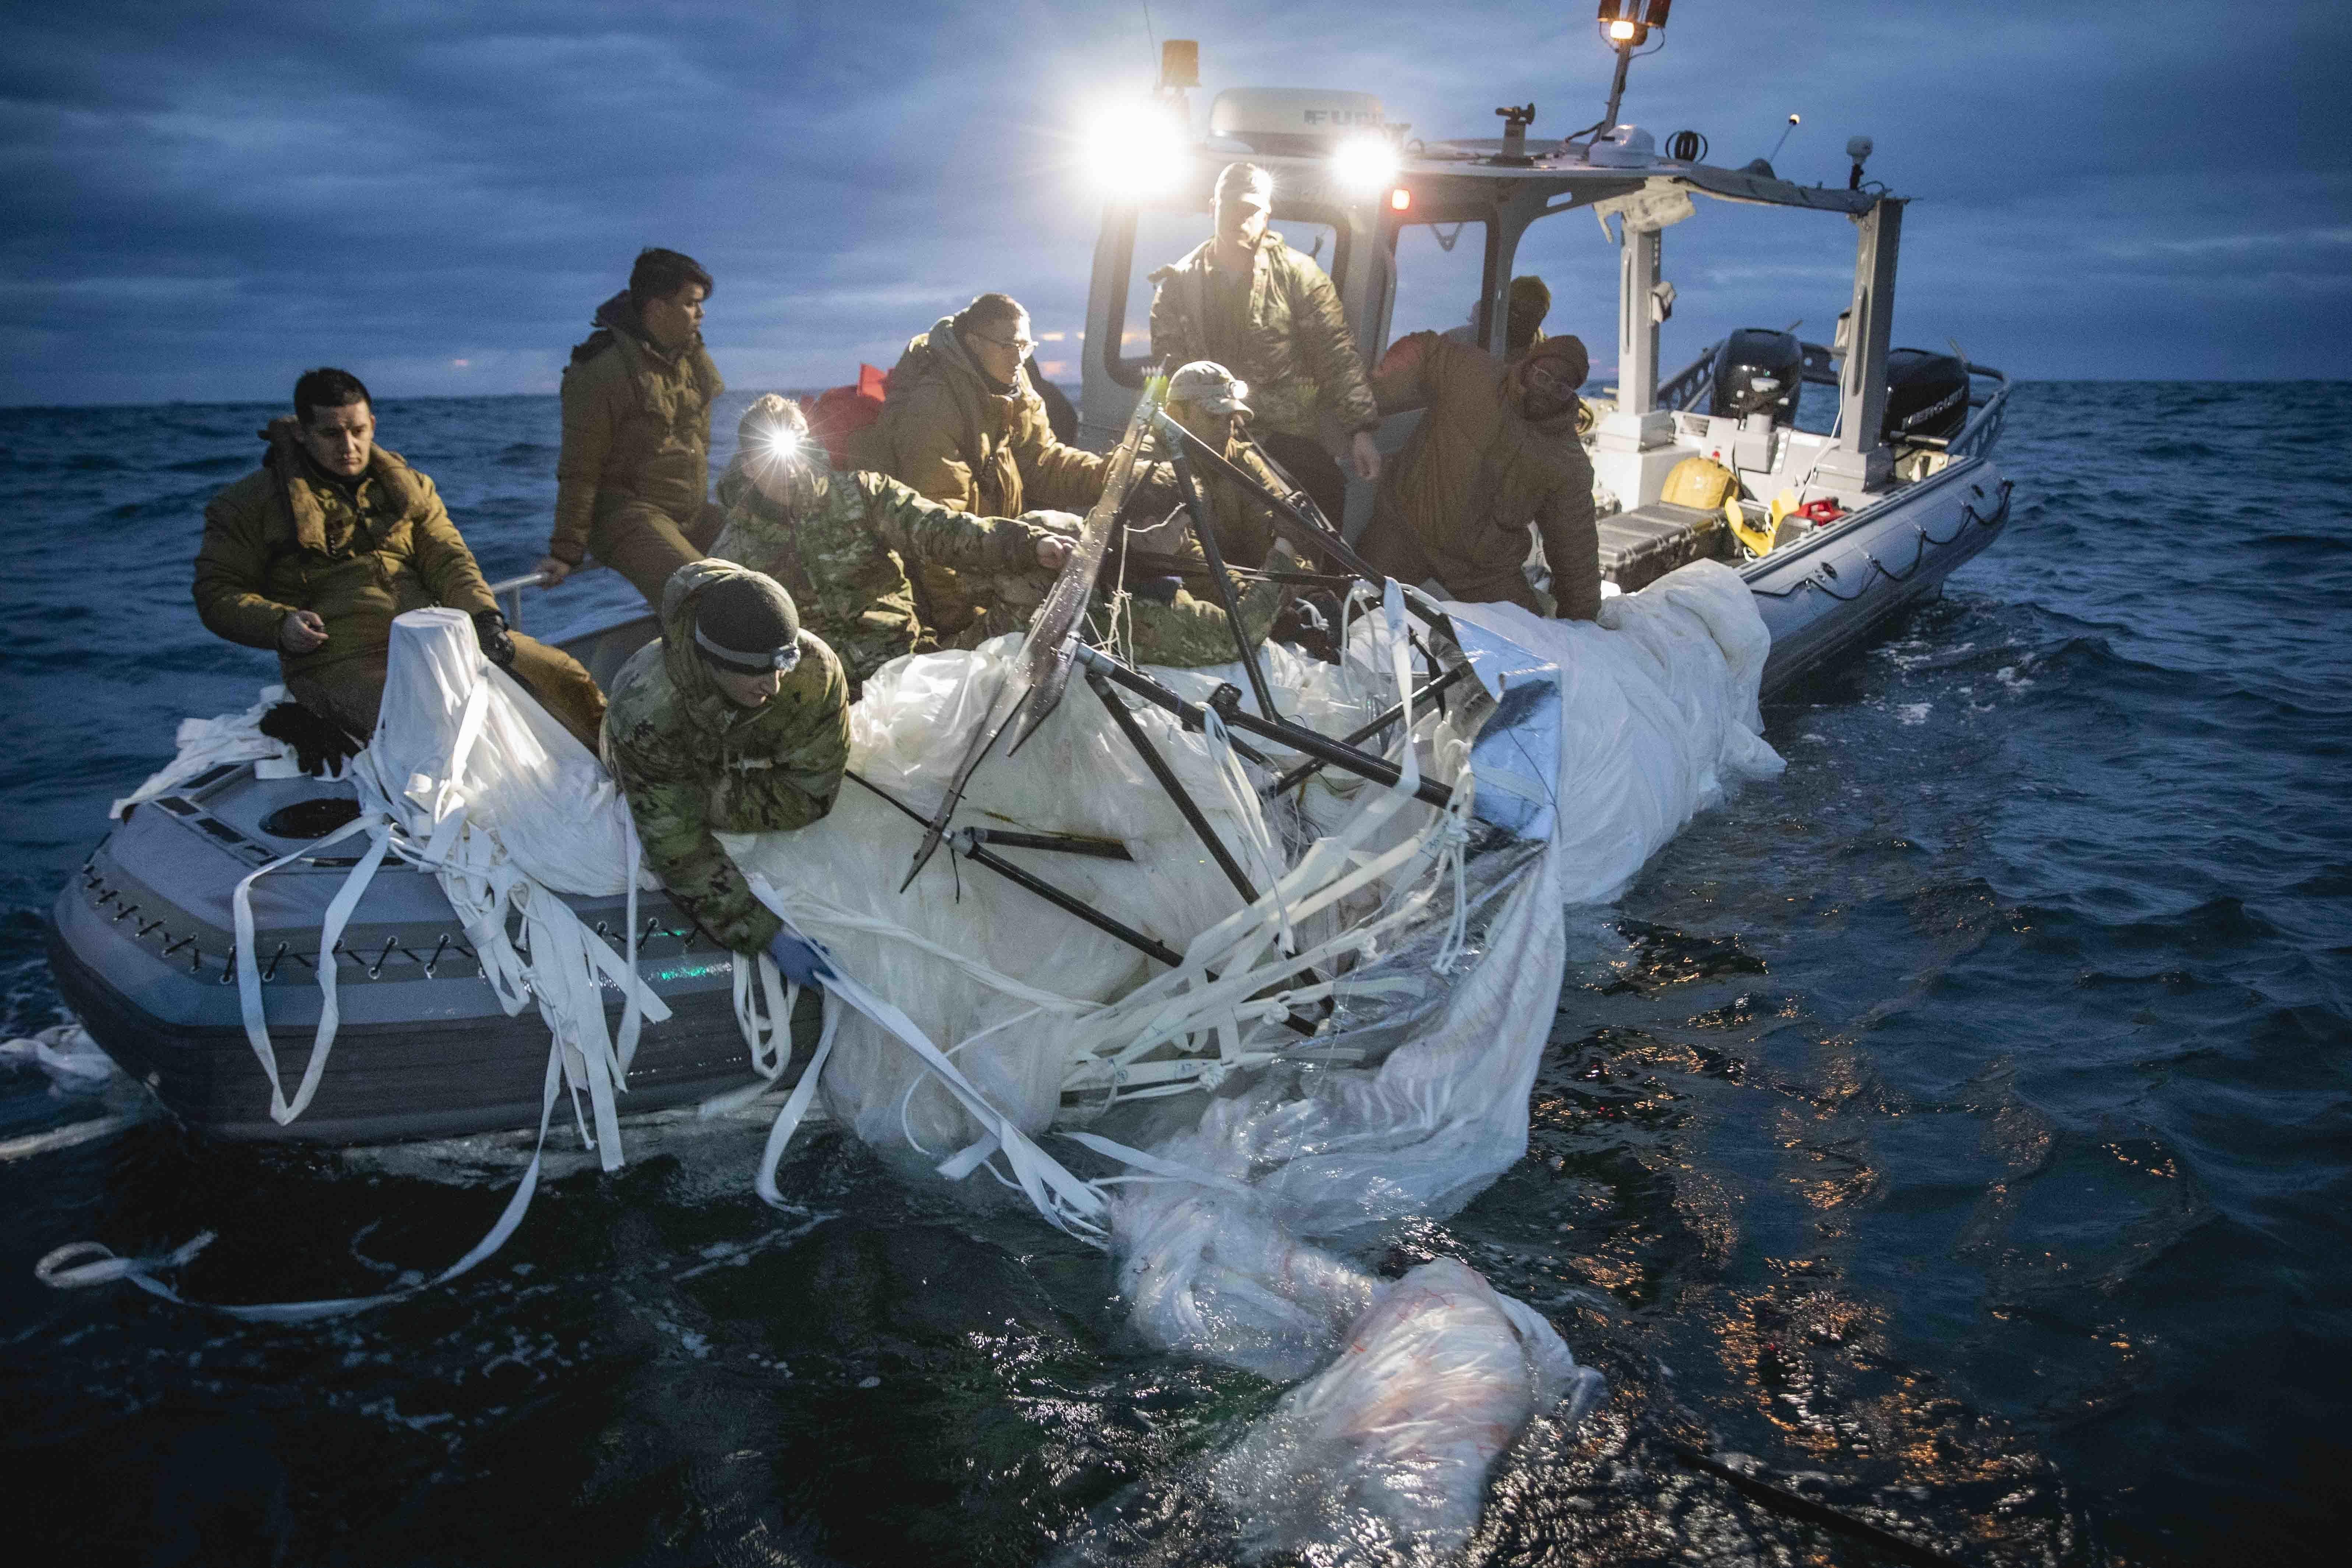 A large white section of balloon debris being hauled into a boat by several sailors.